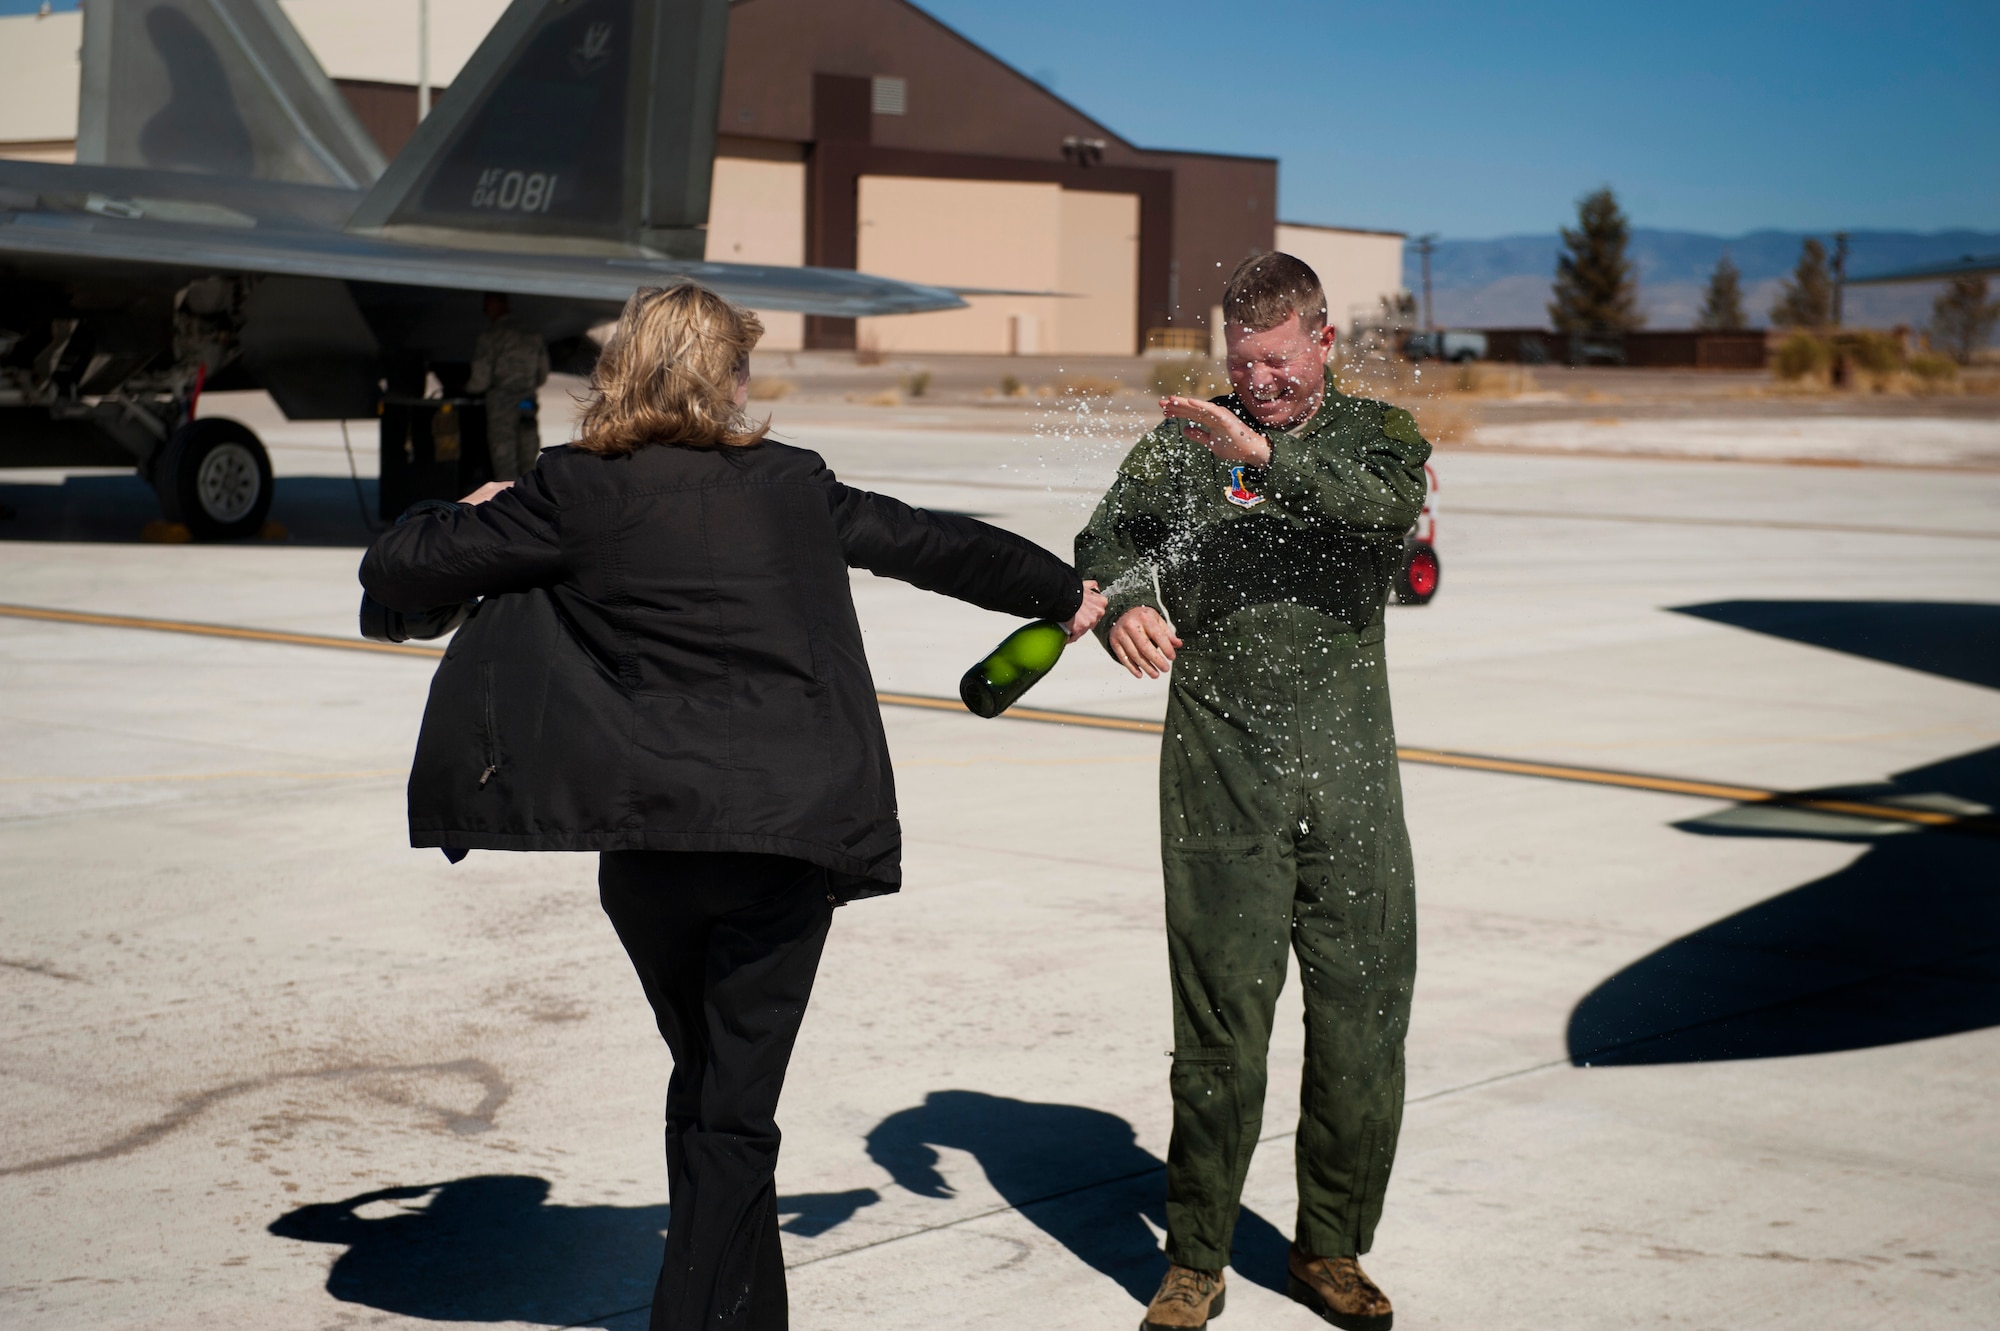 Vicki Croft sprays champagne on Col. Andrew Croft, 49th Wing commander, after his final flight in the F-22 Raptor at Holloman Air Force Base, N.M., Feb. 20. The 7th Fighter Squadron and members of the Holloman community celebrated this sortie before the F-22s depart for Tyndall Air Force Base, Fla., in early April. (U.S. Air Force photo by Airman 1st Class Aaron Montoya / Released)